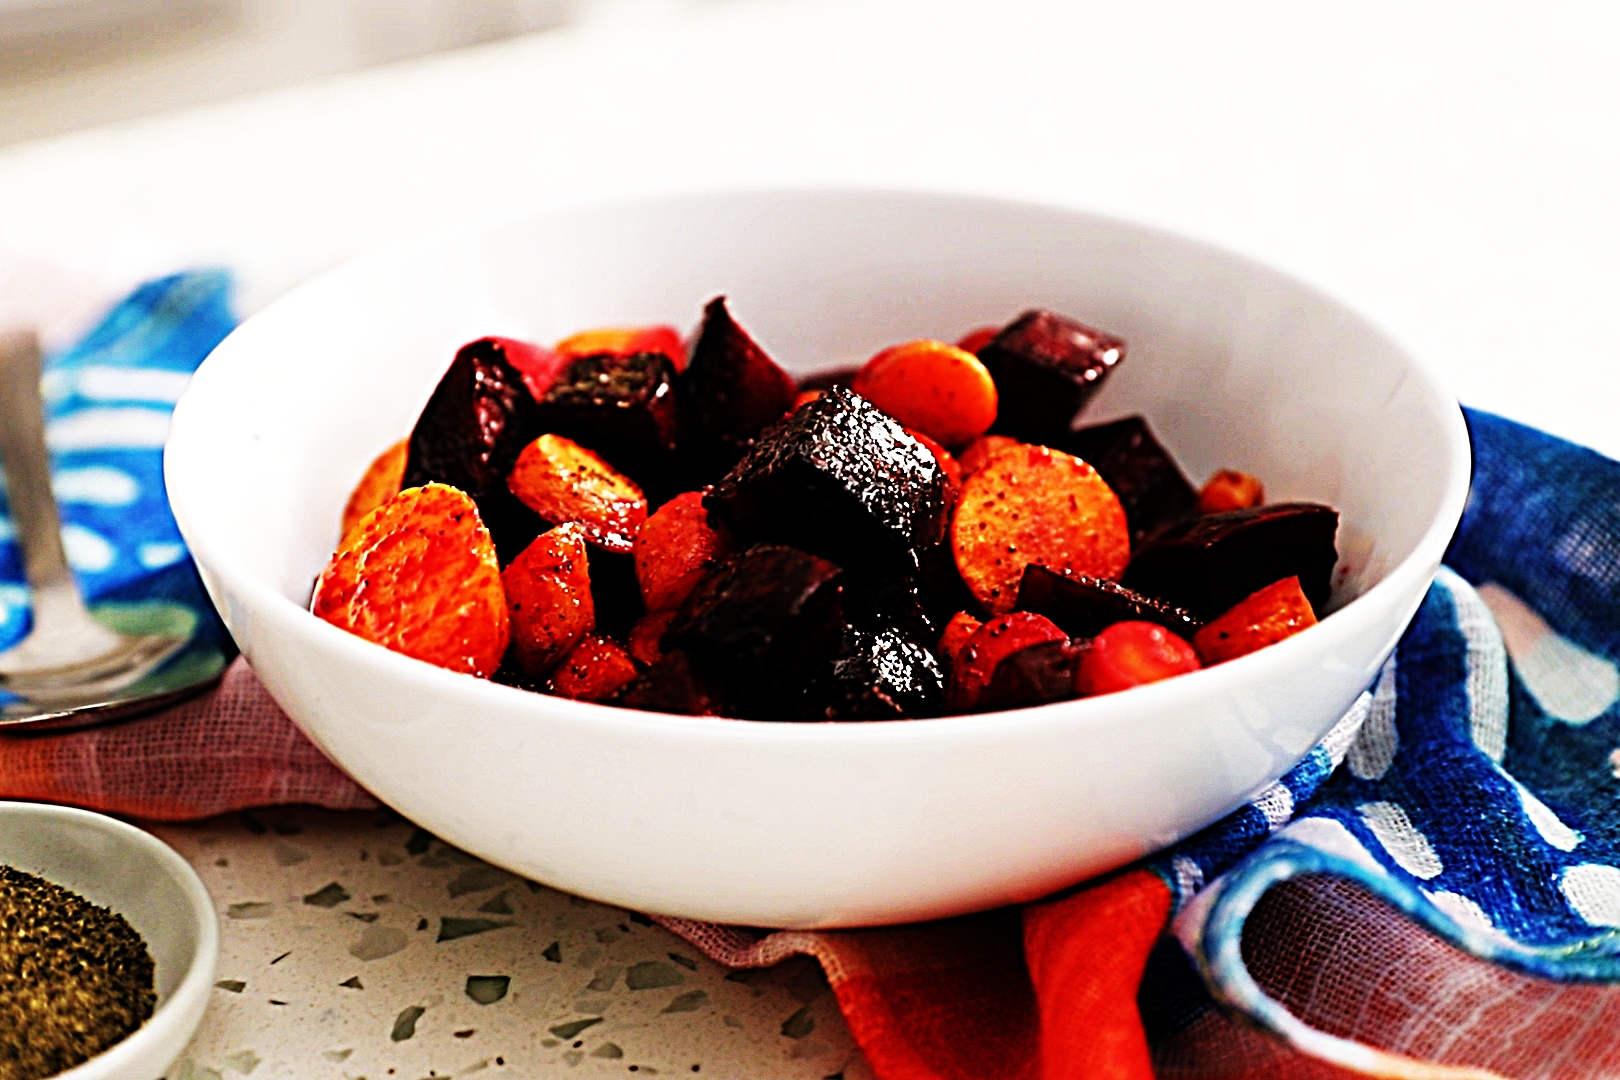 Stupid-Easy Recipe for Roasted Beets and Carrots (#1 Top-Rated)